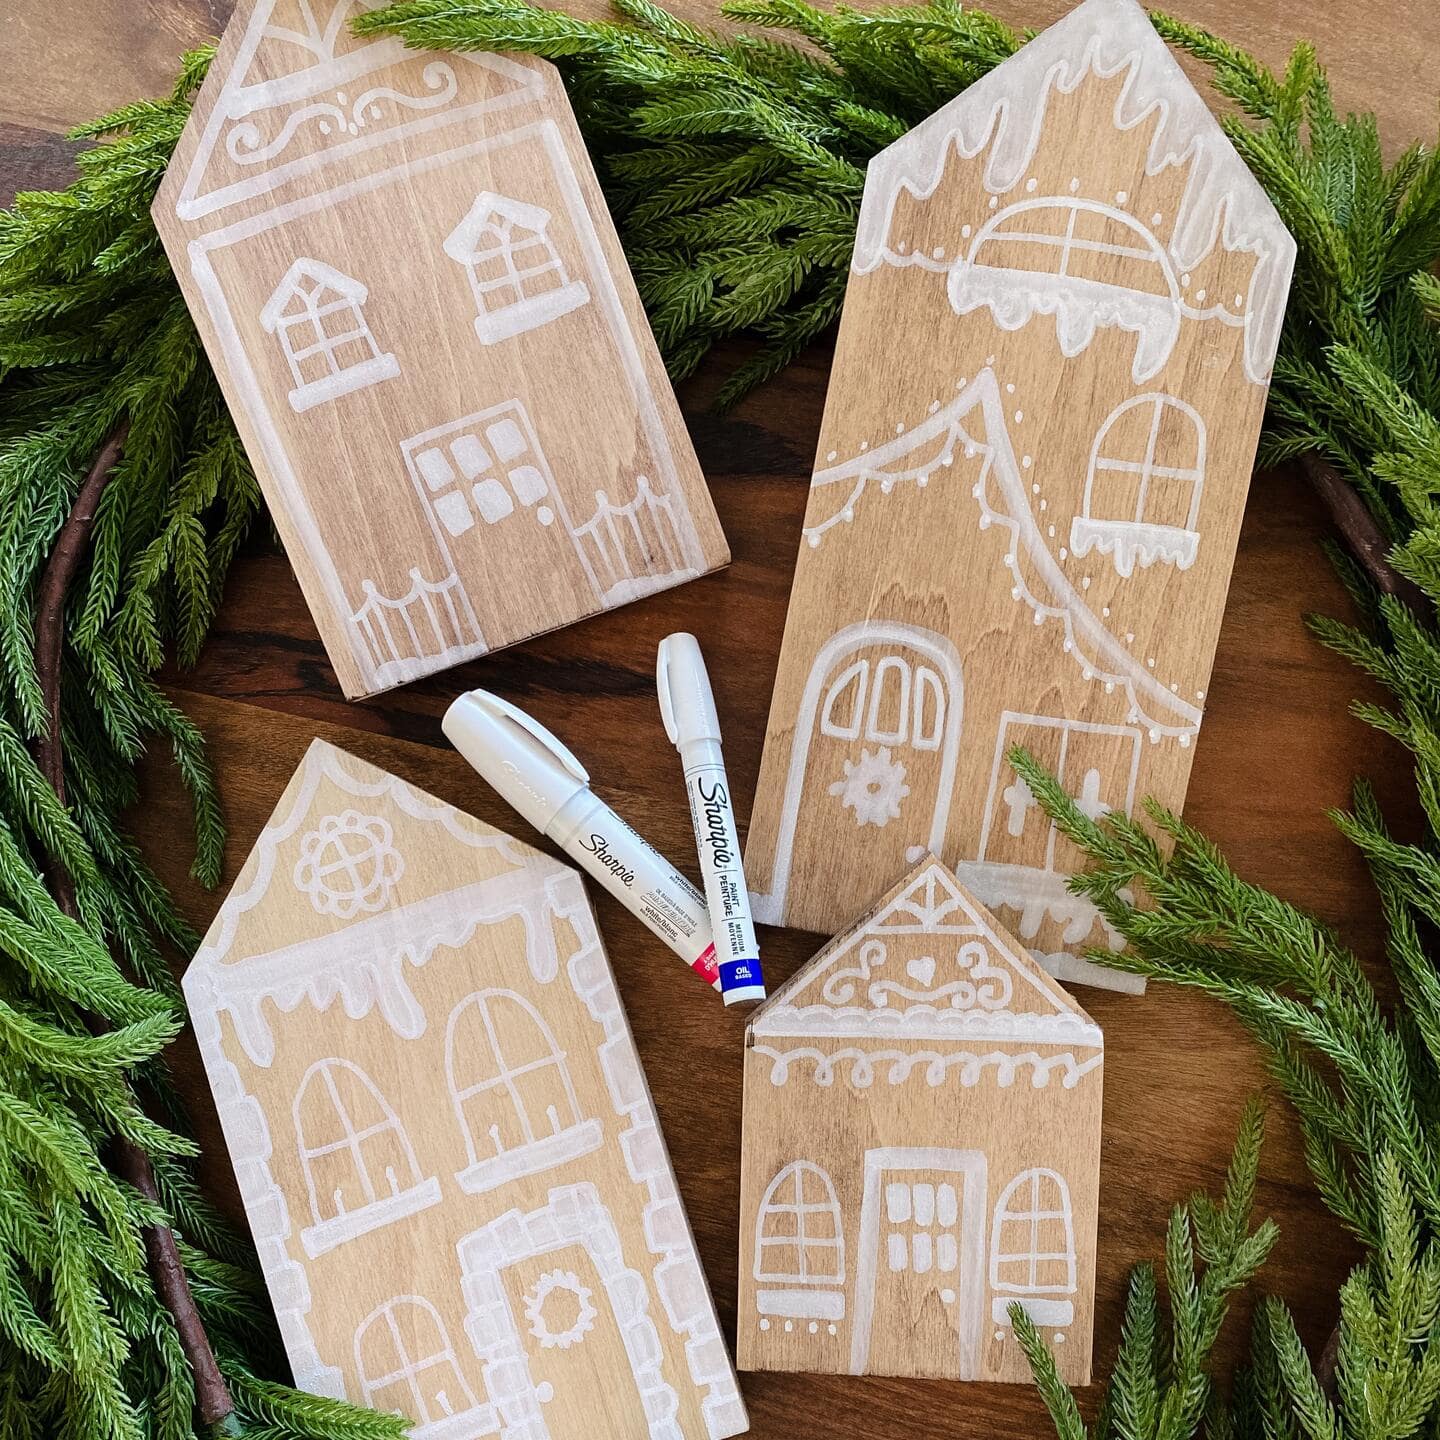 Decorated wooden houses.